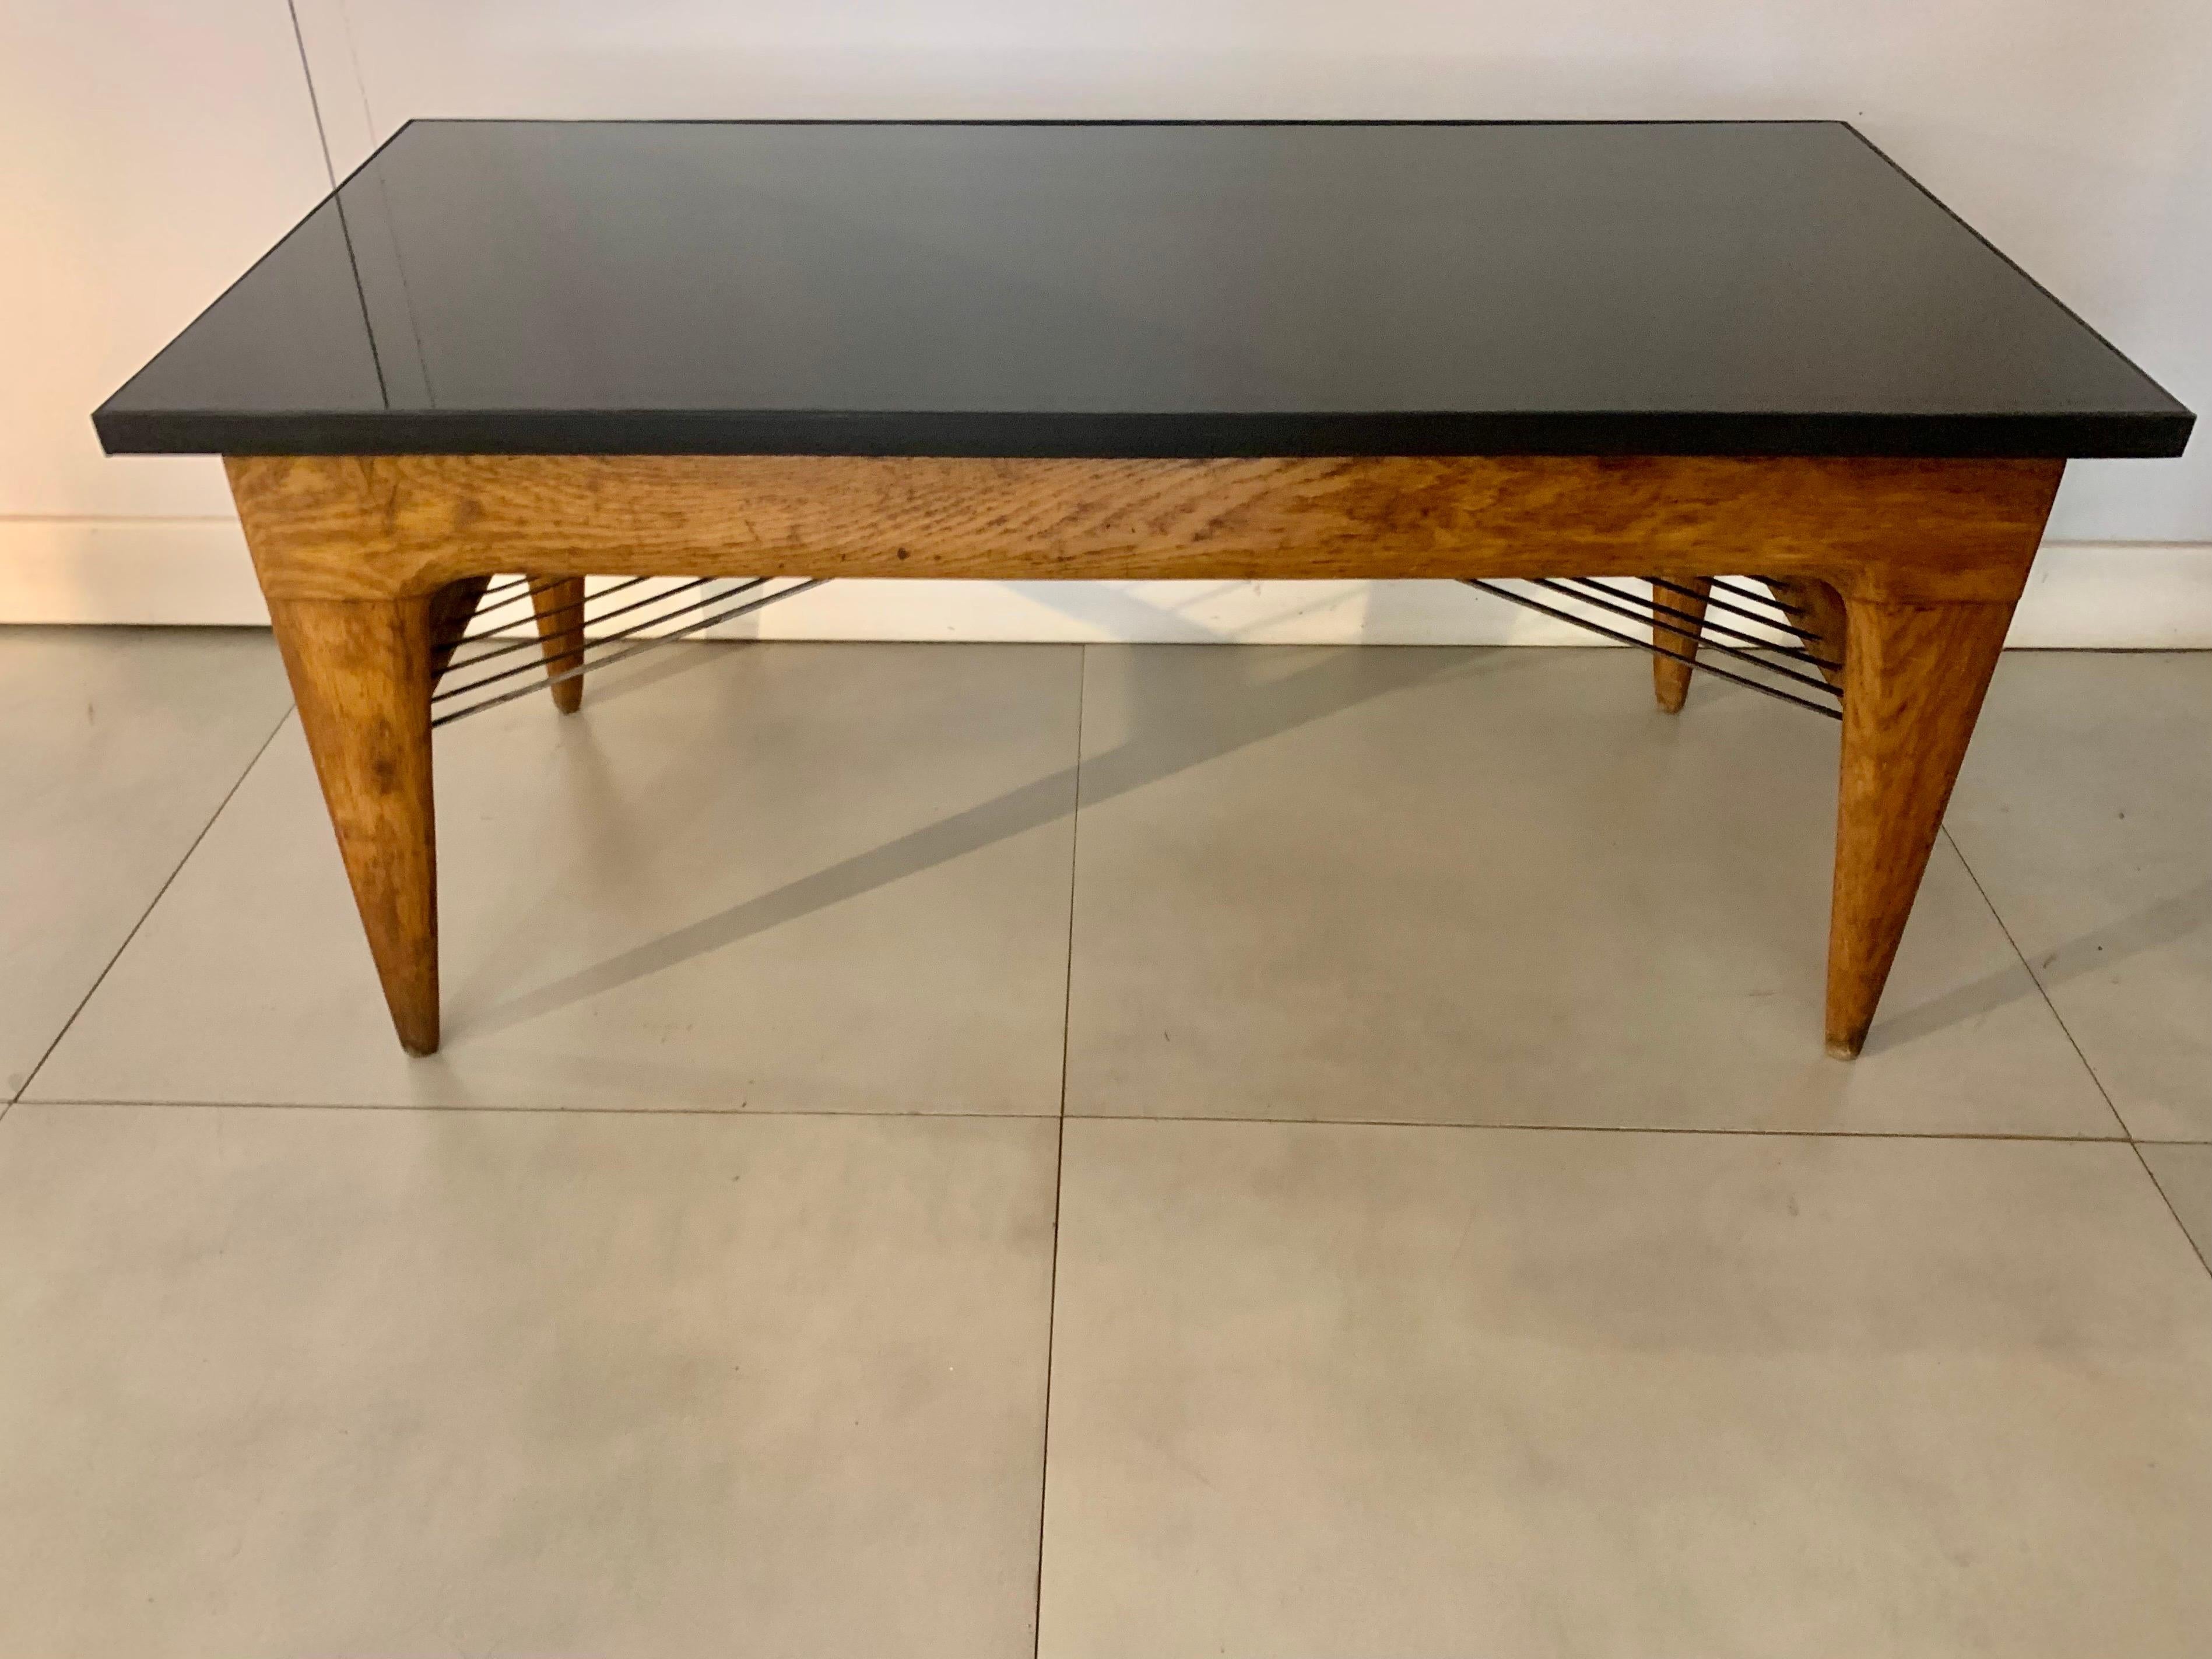 Coffee table in French oak, from the 1950s, with black lacquered metal and black glass top,
In the lower part they have some black rods that are used to support press, or papers, the legs in the shape of a stipe.